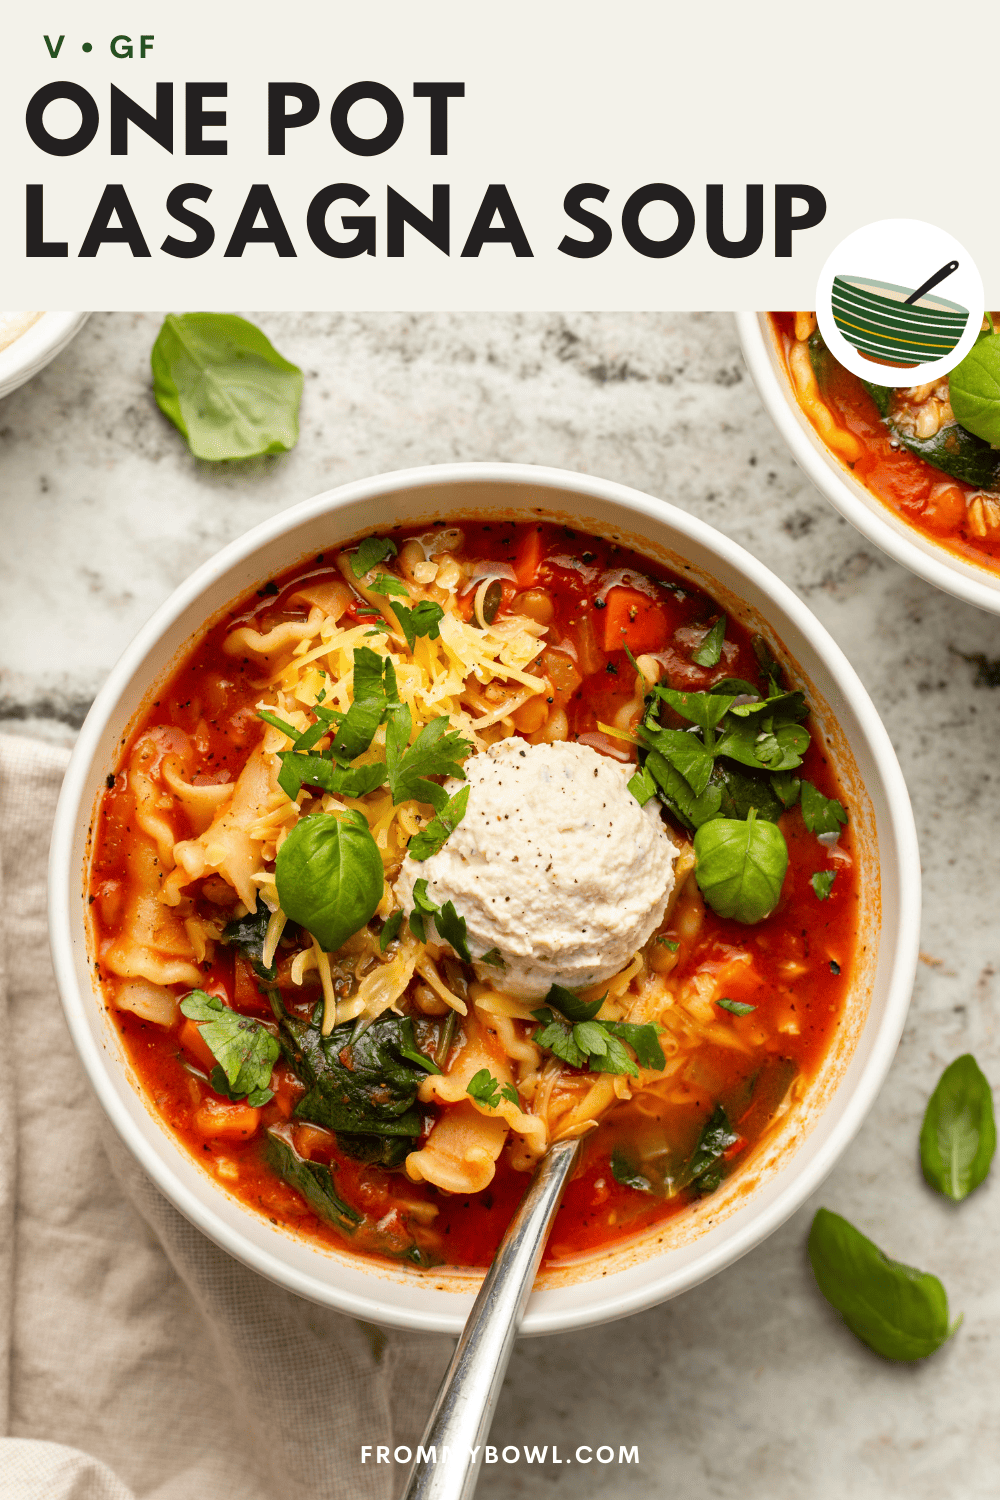 Close-up photo of vegan lasagna soup topped with ricotta cheese, and fresh herbs on stone countertop